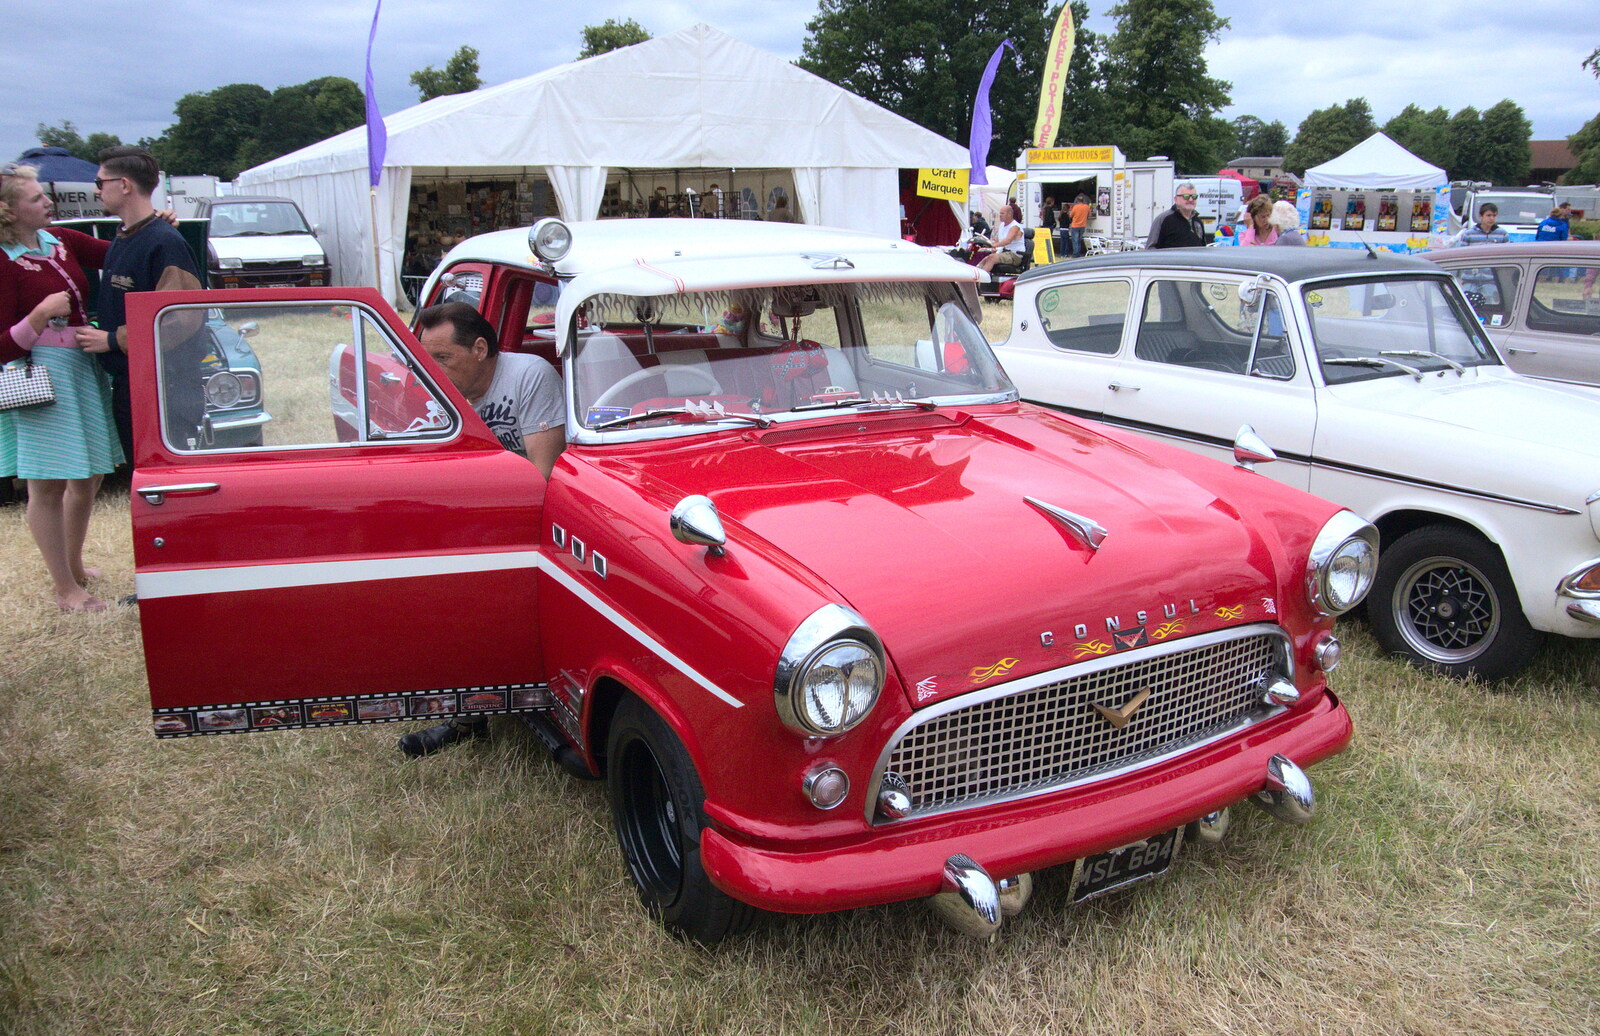 A nice old 1950s Ford Consul from The Formerly-Known-As-The-Eye-Show, Palgrave, Suffolk - 17th June 2018